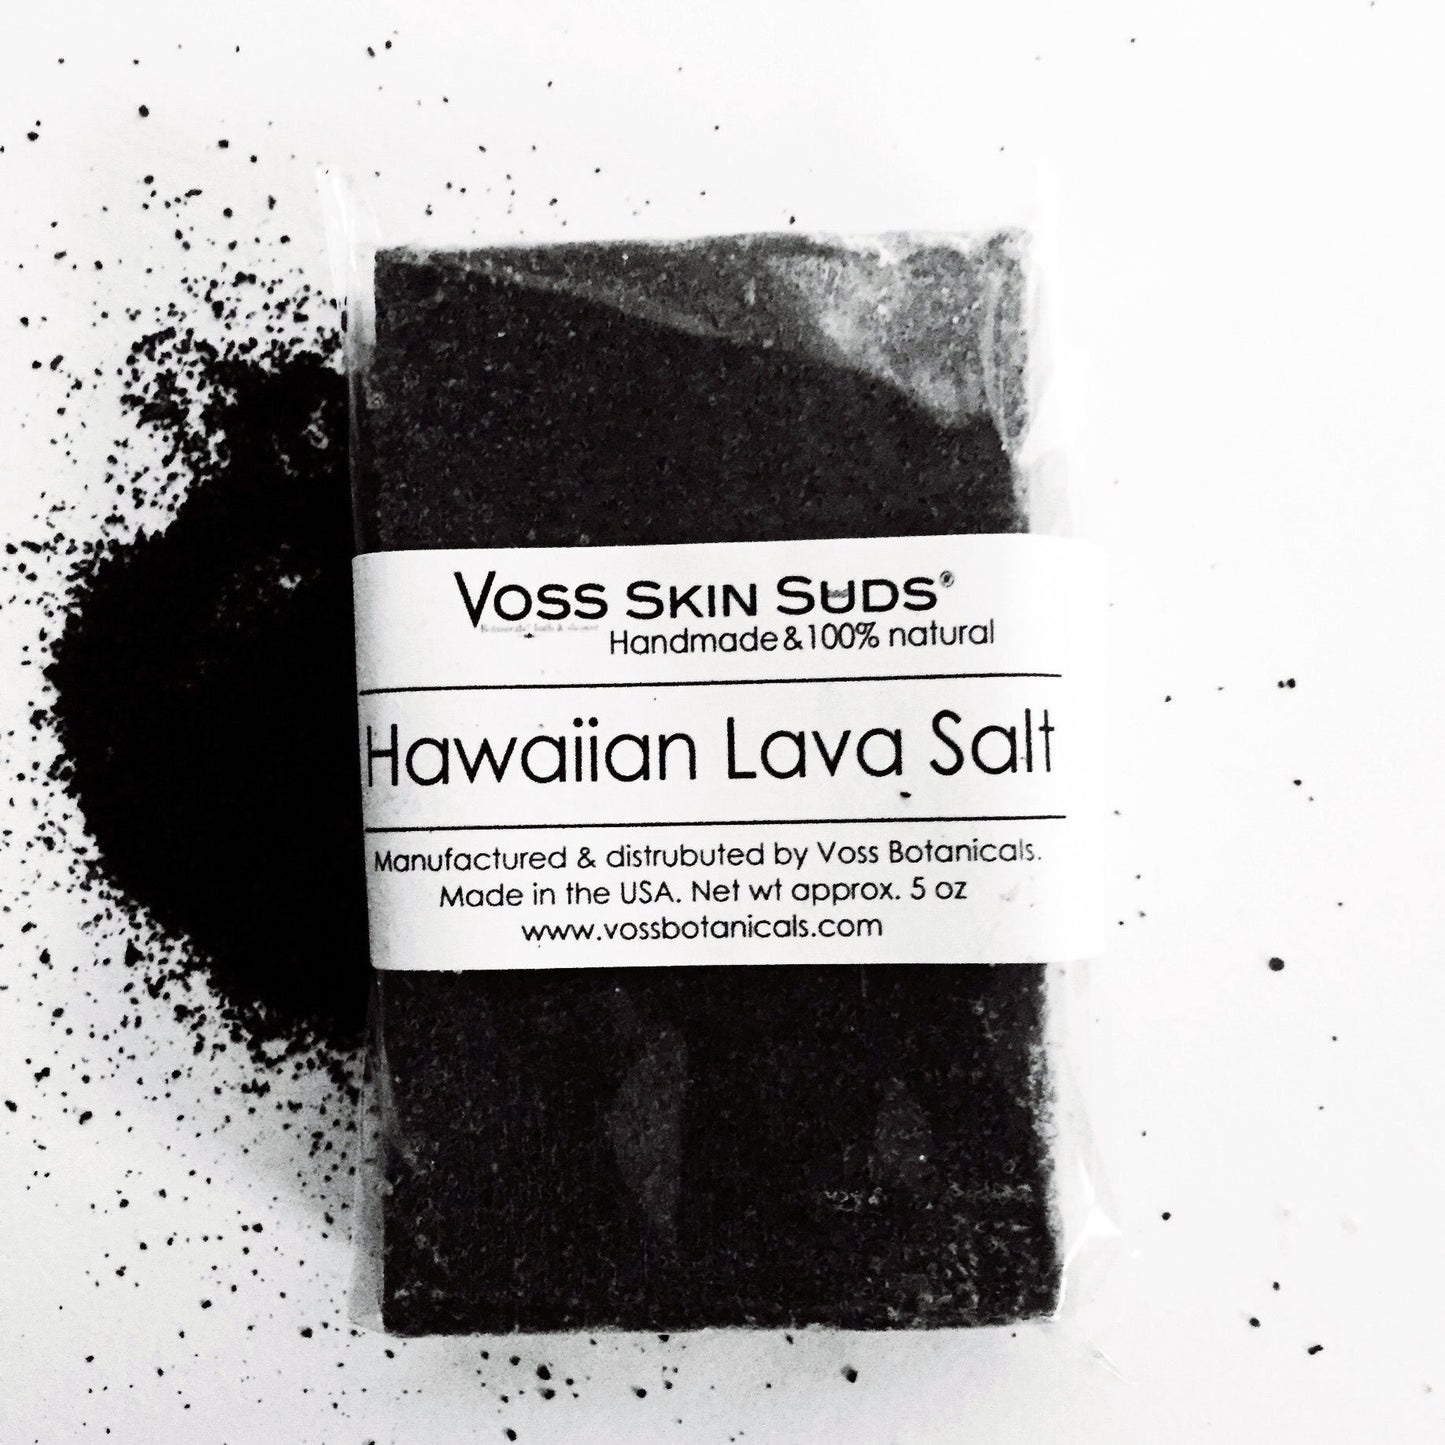 Hawaiian Lava Black Salt soap PRODUCT FOOTPRINTS Natural ingredients Phthalate, Sulfate, Petroleum & Paraben Free Vegan Free of Synthetic Fragrances Free of Synthetic Dyes GMO & Gluten-free Non Toxic Handmade Sustainable Innovation Made in the USA Cruelty Free Zero Waste Low Carbon Footprint eco friendly   Holiday care package gift box gift for her relaxation gift self care box self care gift box spa gift box spa gift set thank you gift box birthday gift new mom gift relaxing bath set spa gift set spa kit